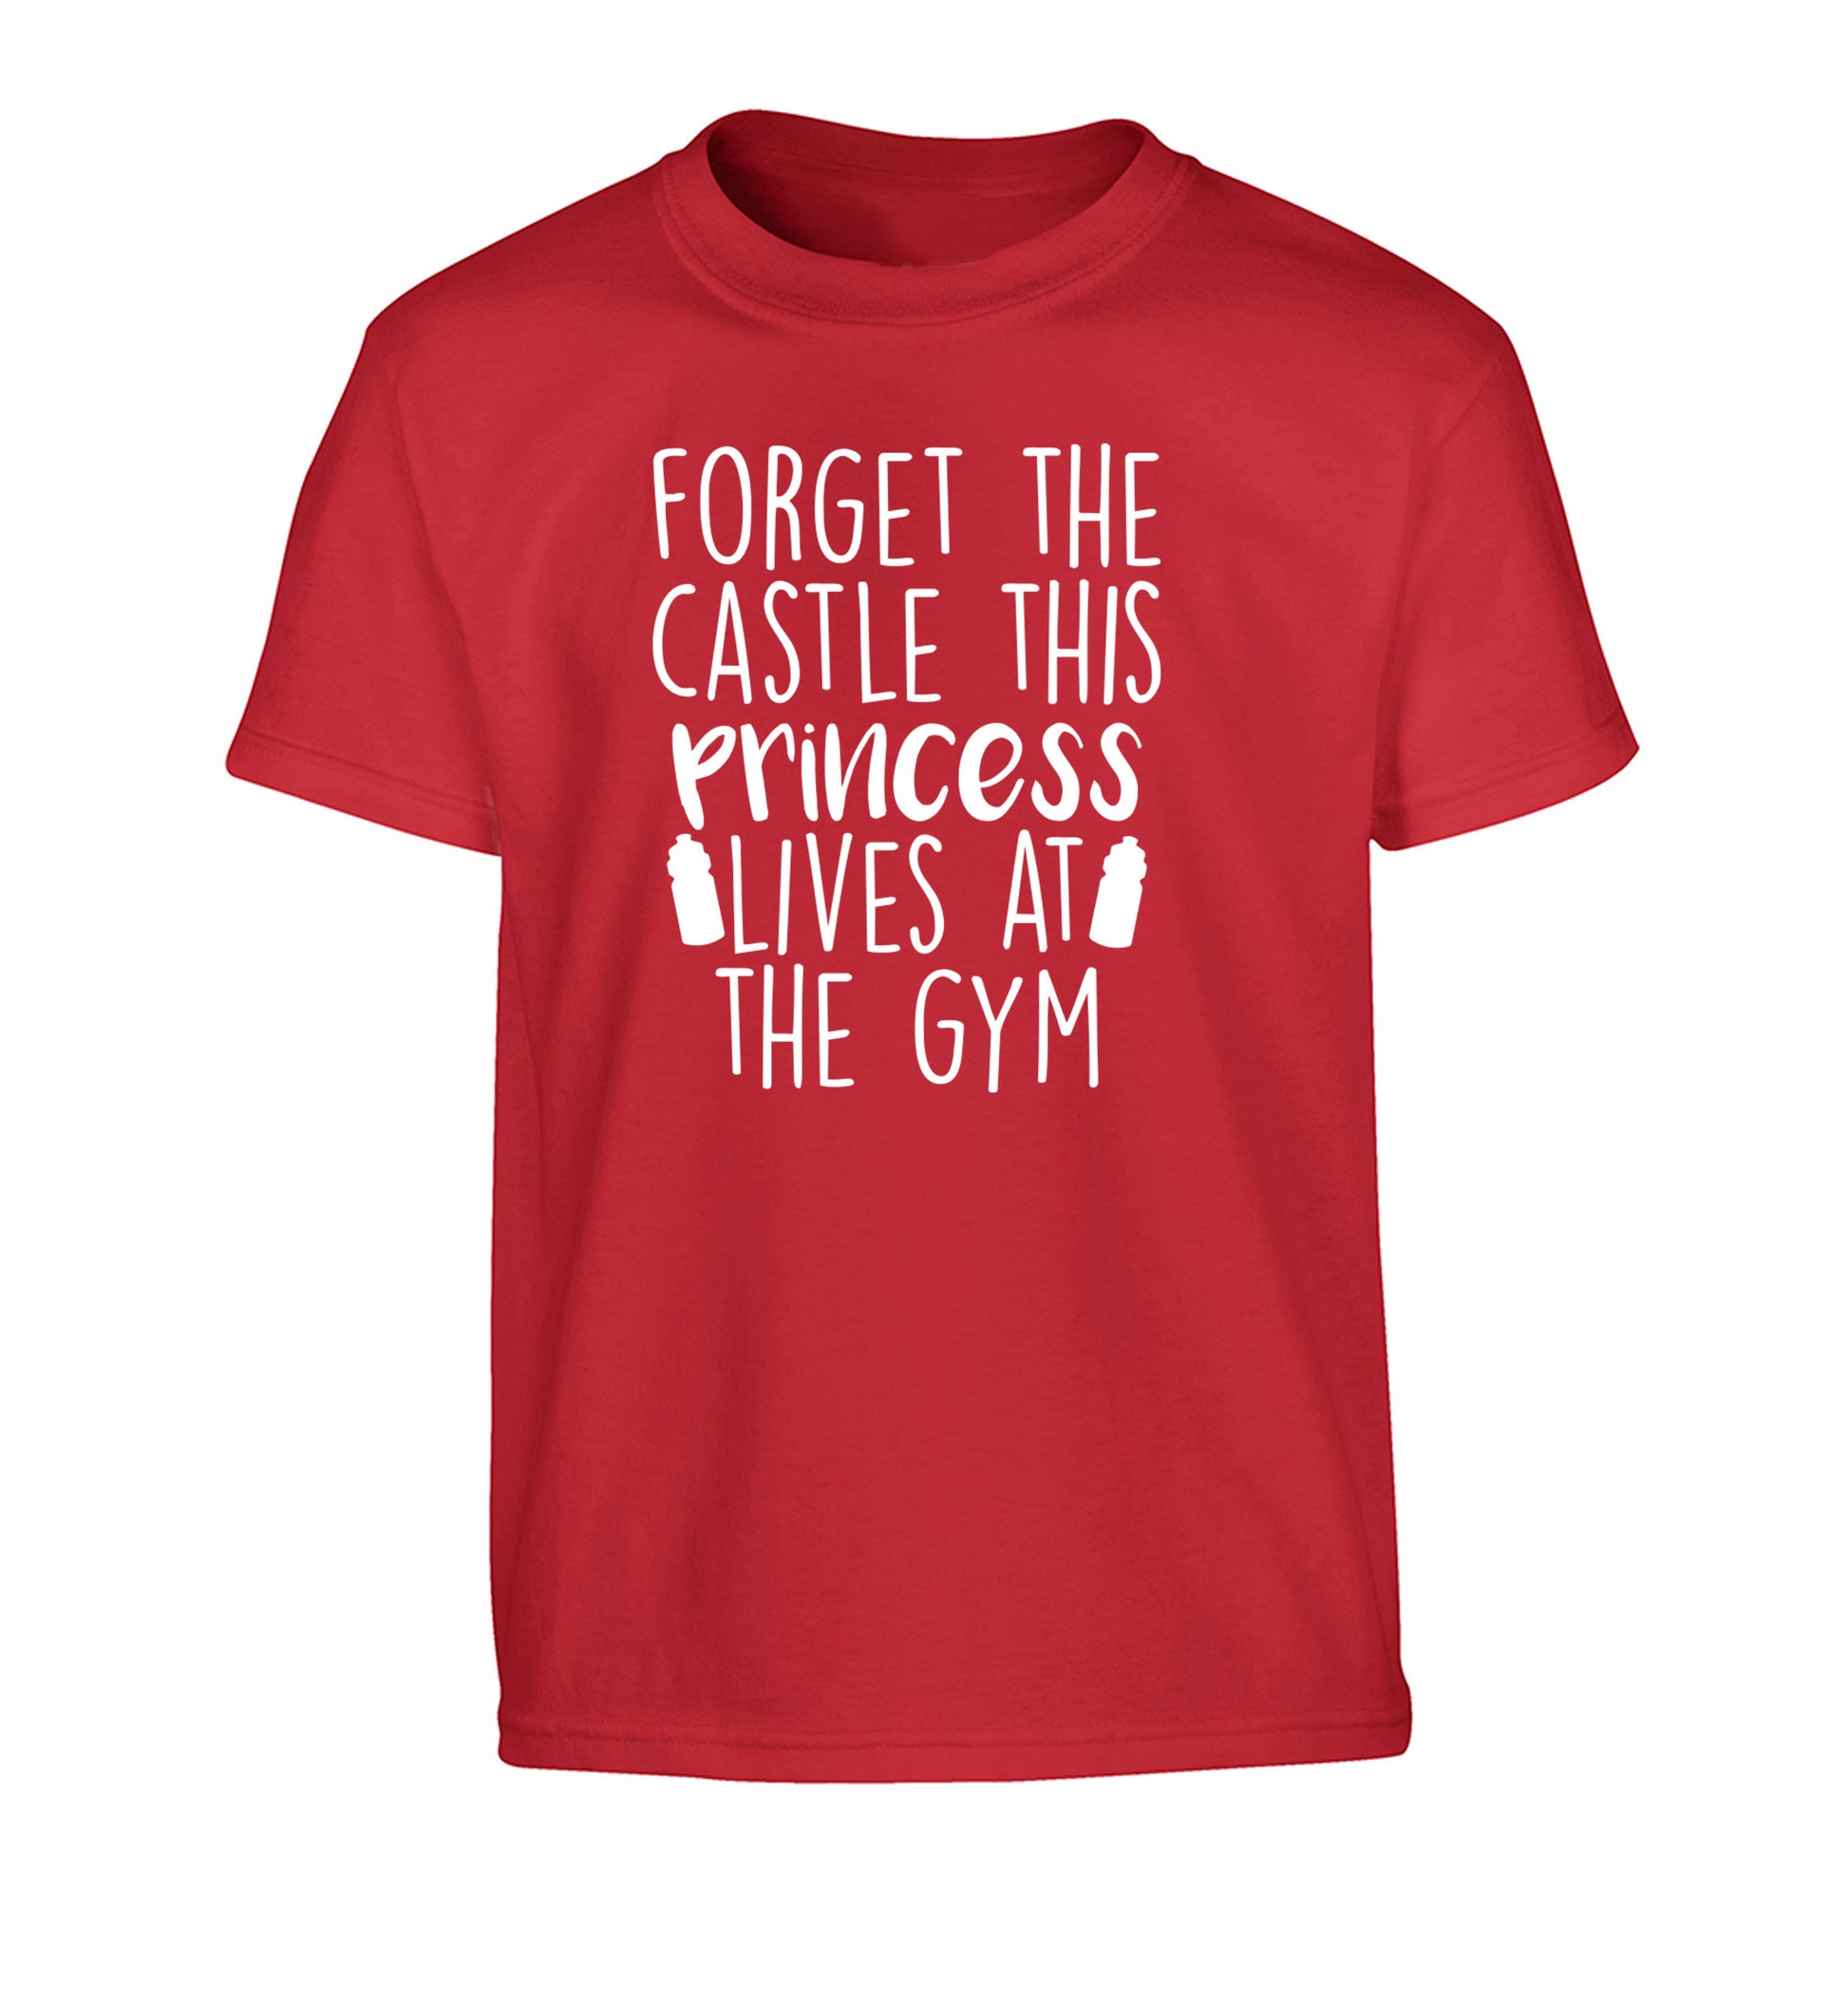 Forget the castle this princess lives at the gym Children's red Tshirt 12-14 Years